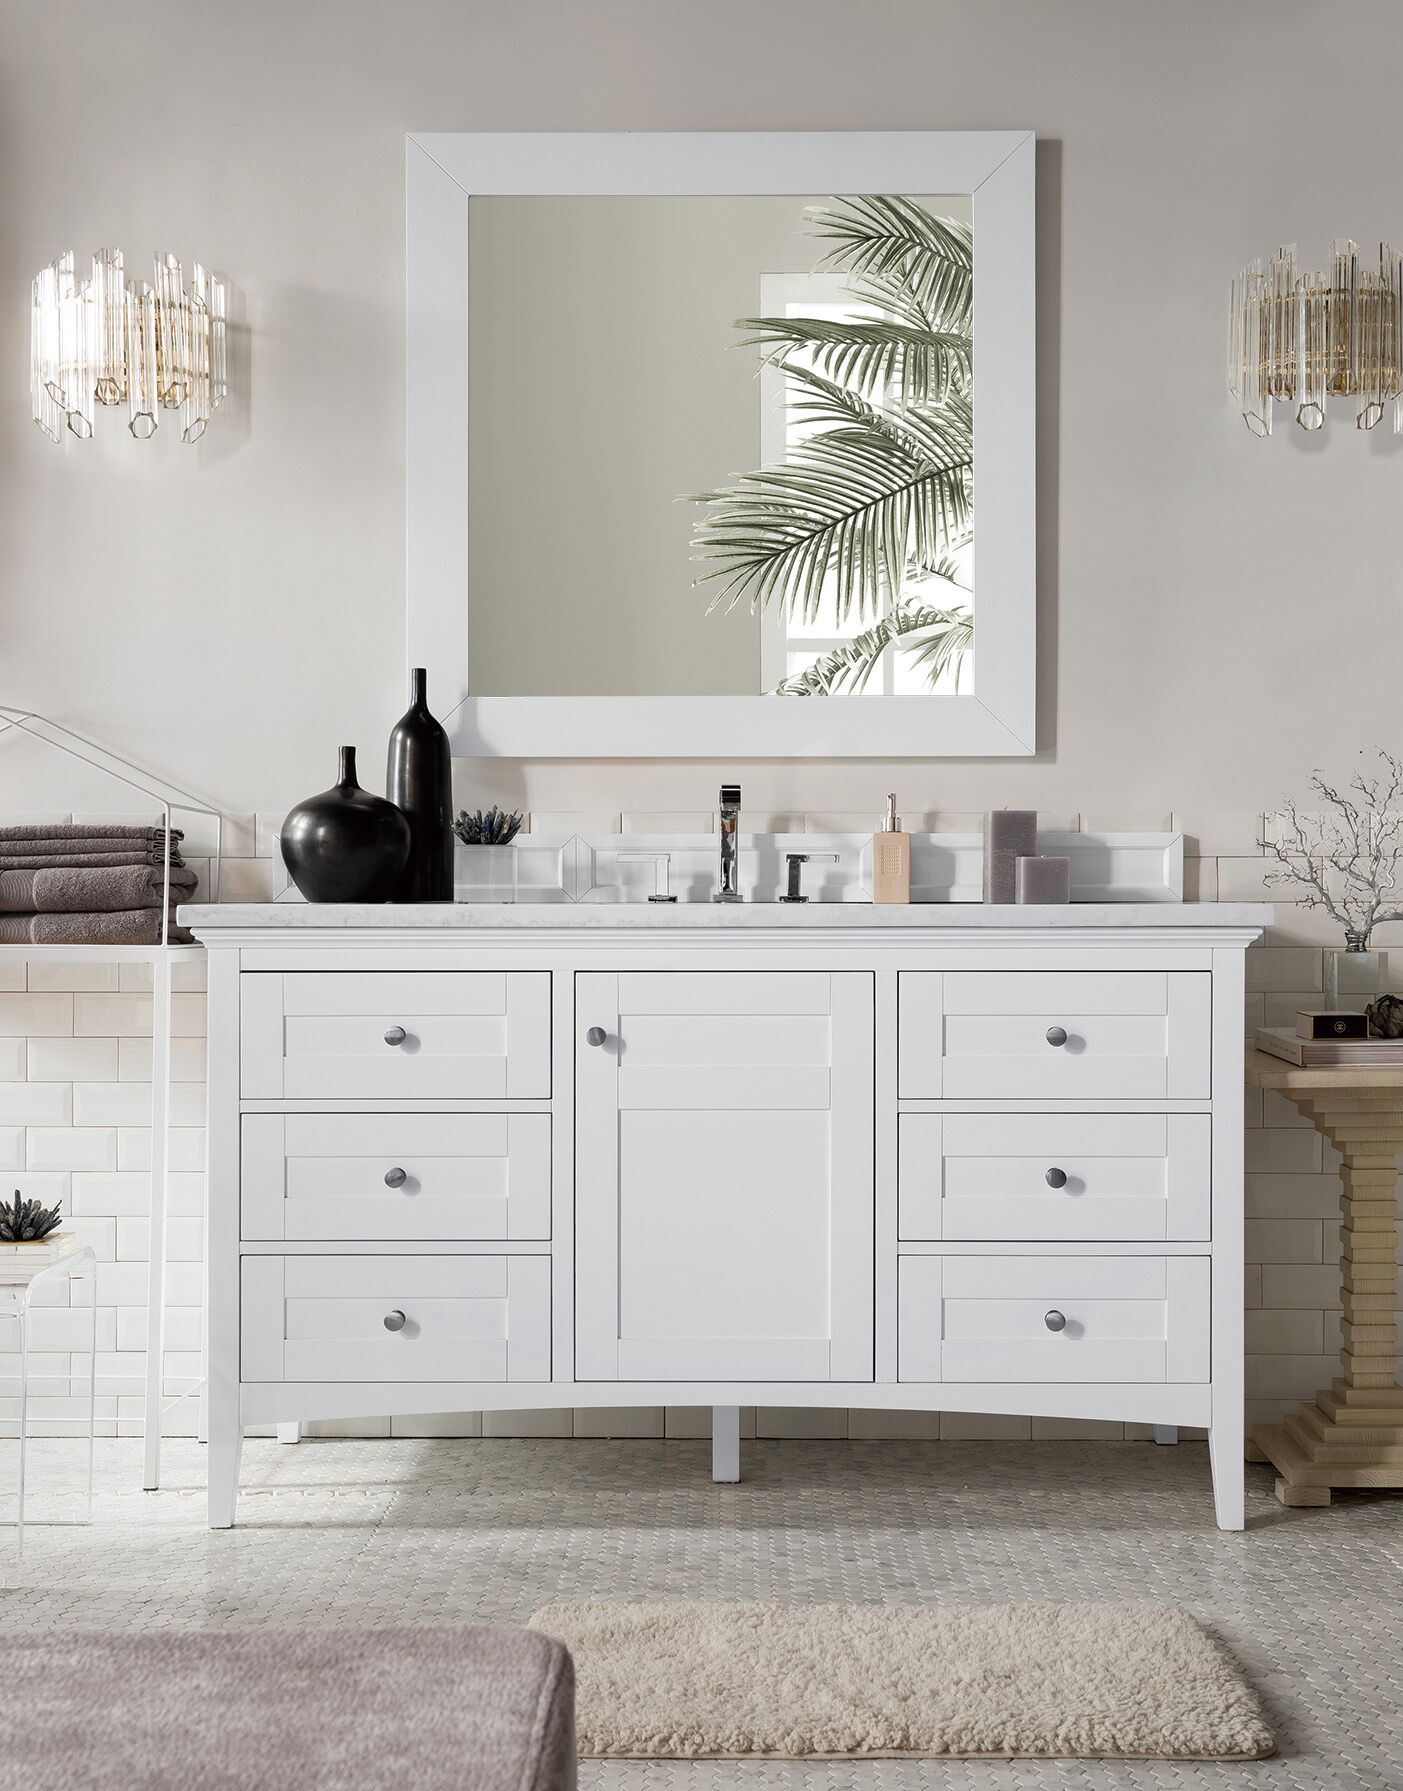 wholesale discount factory direct vanity cabinets indianapolis, zionsville, carmel indiana